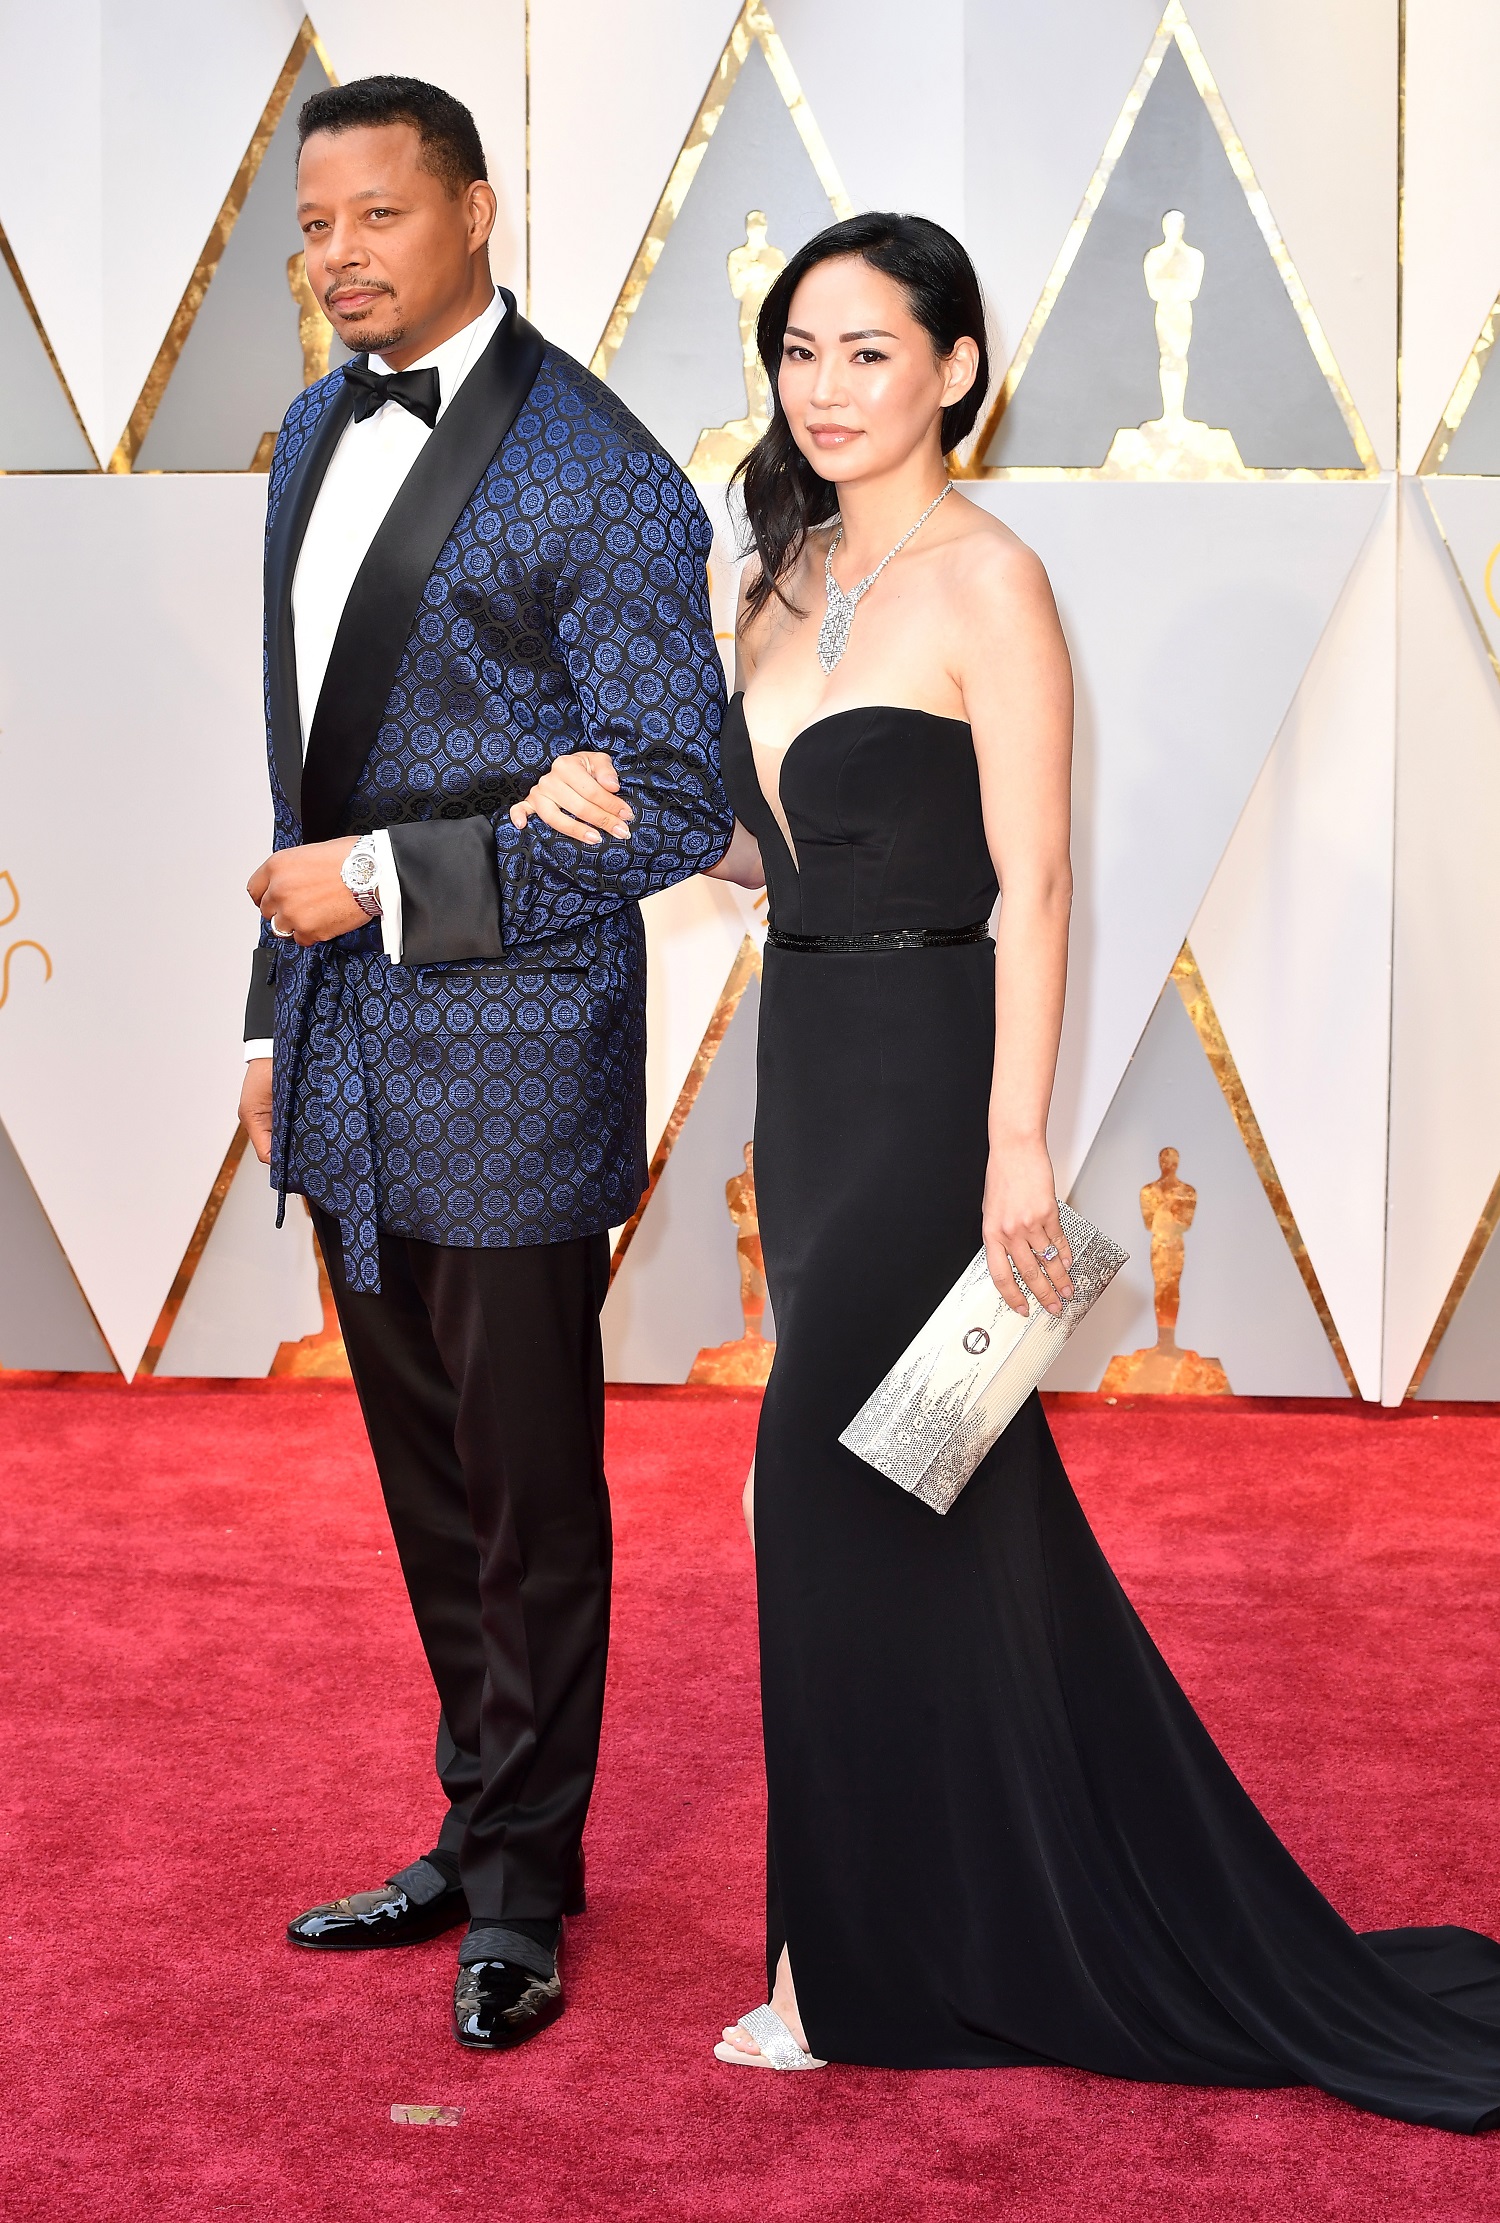 Terrence Howard and Mira Pak attend the 89th Annual Academy Awards in Piaget-Pamper.my